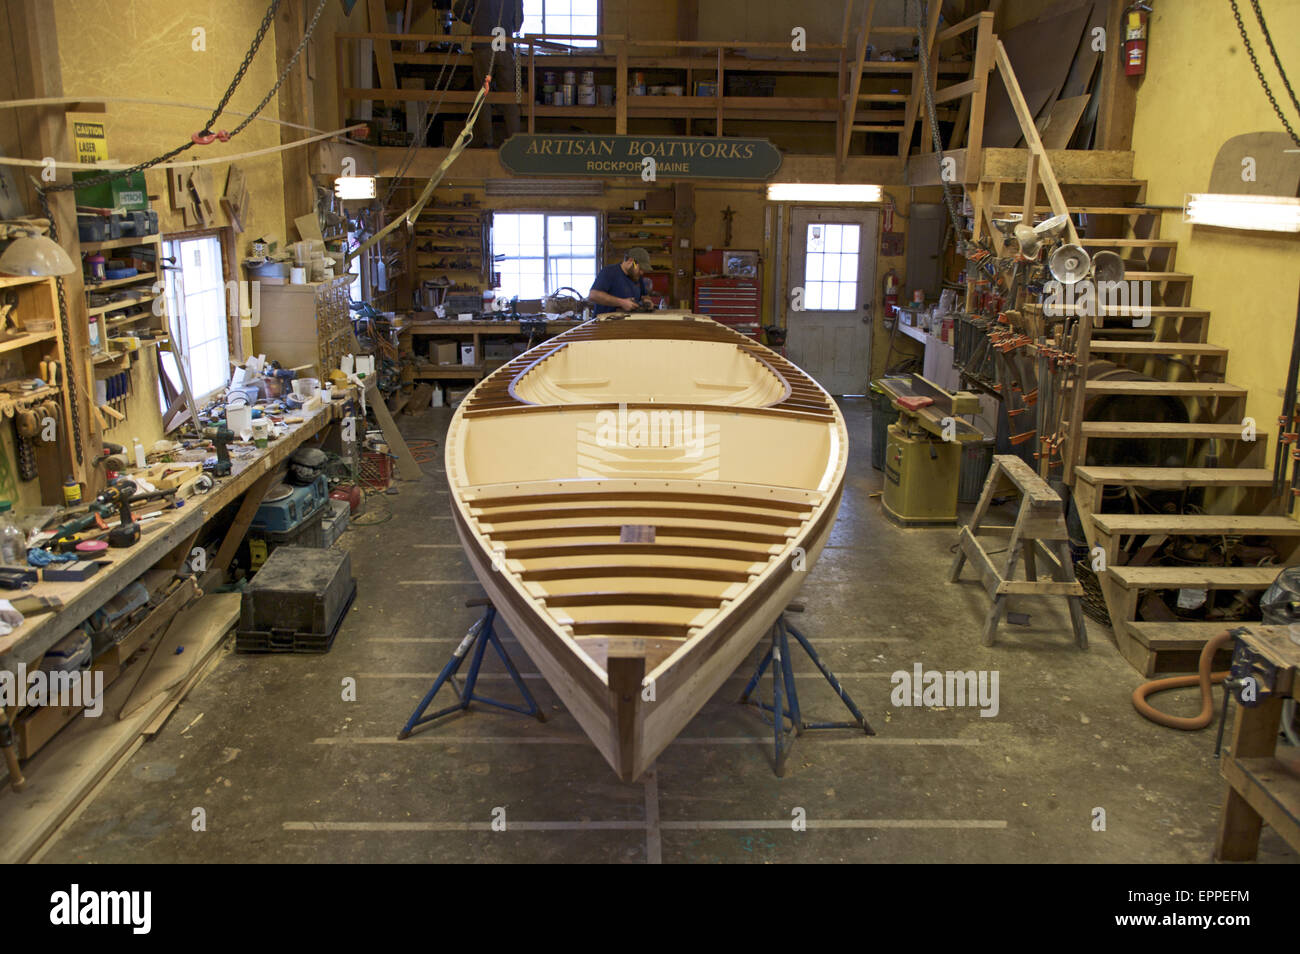 A boat builder, works on the boat he is restoring in a boatbuilding shed. Stock Photo